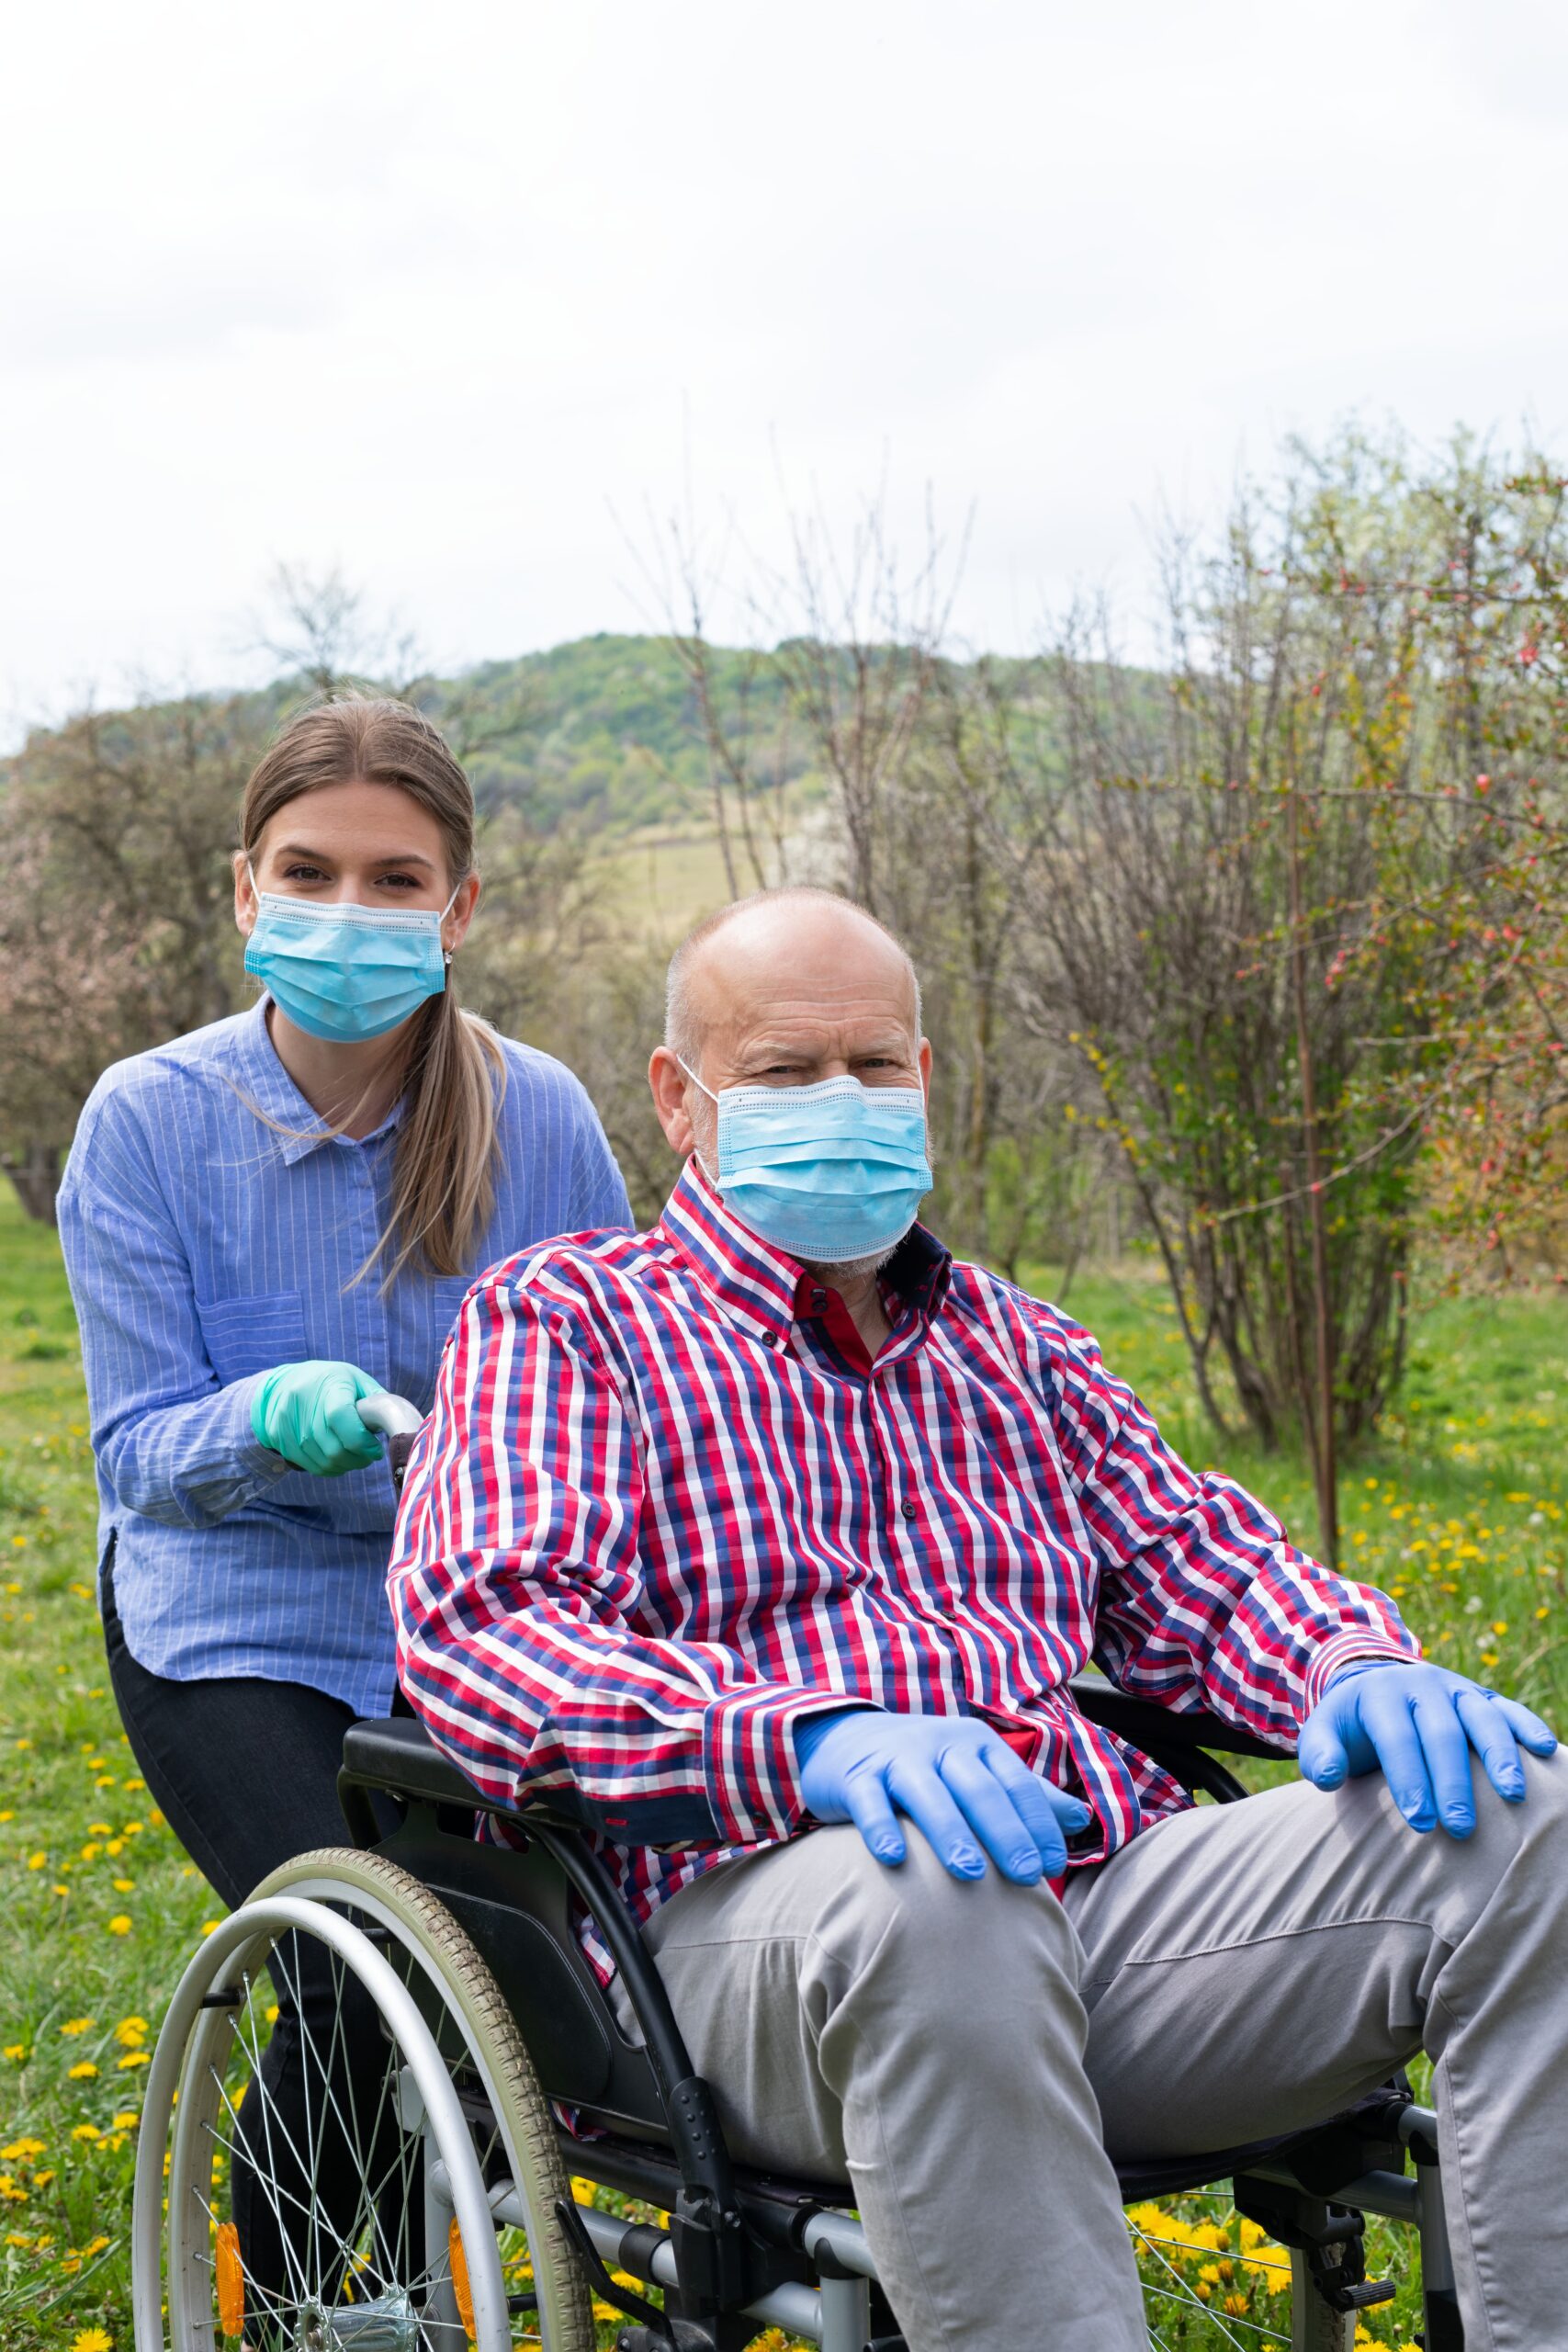 A caretaker and the senior go out in masks and gloves